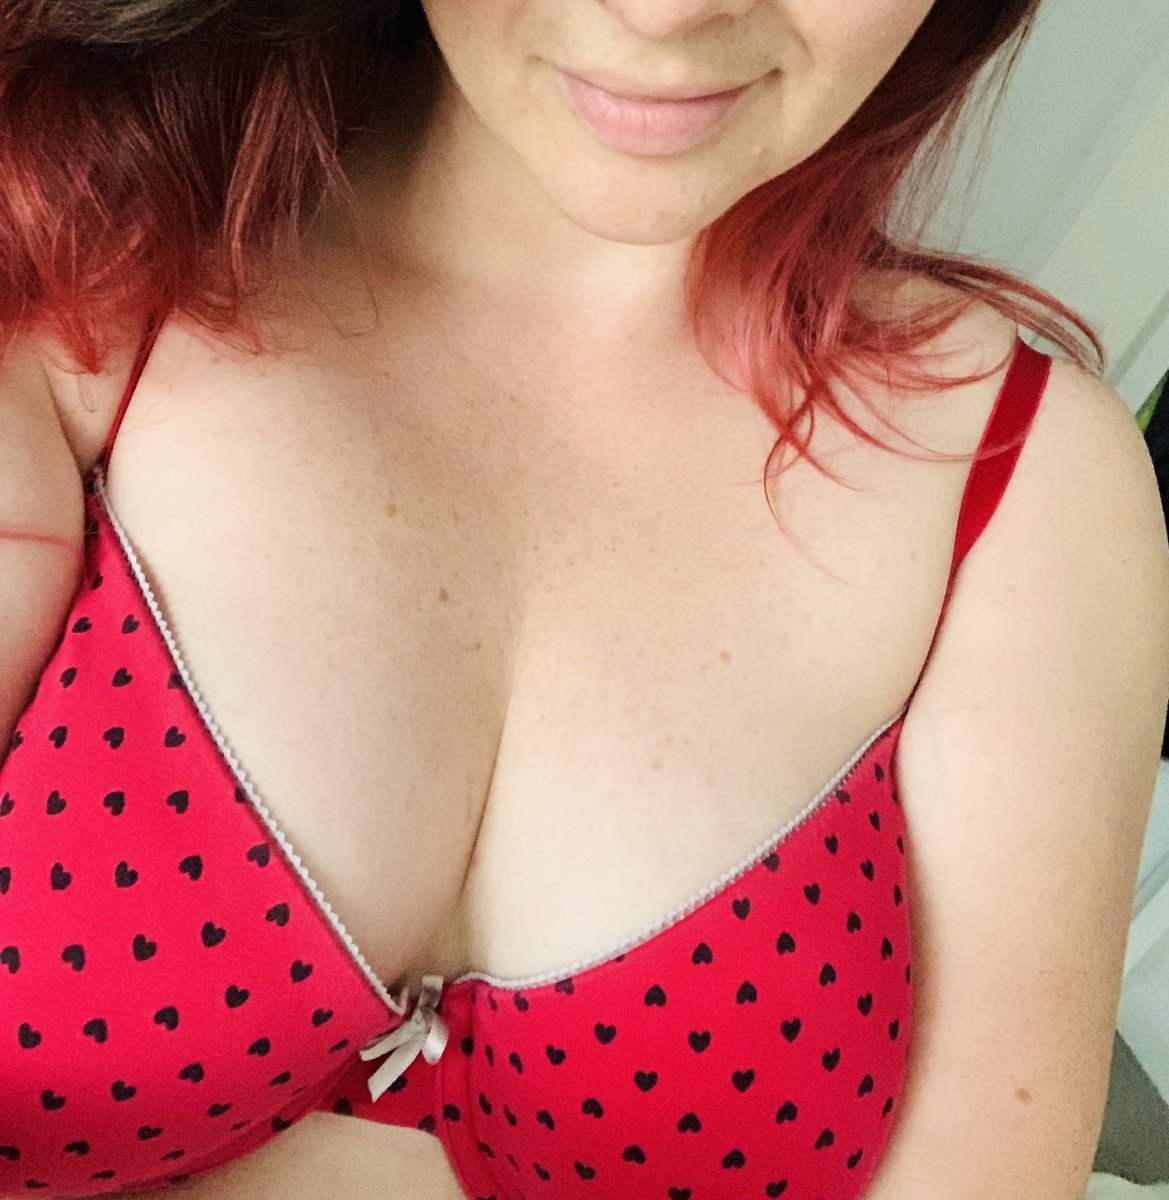 All the red #redhair #boobs